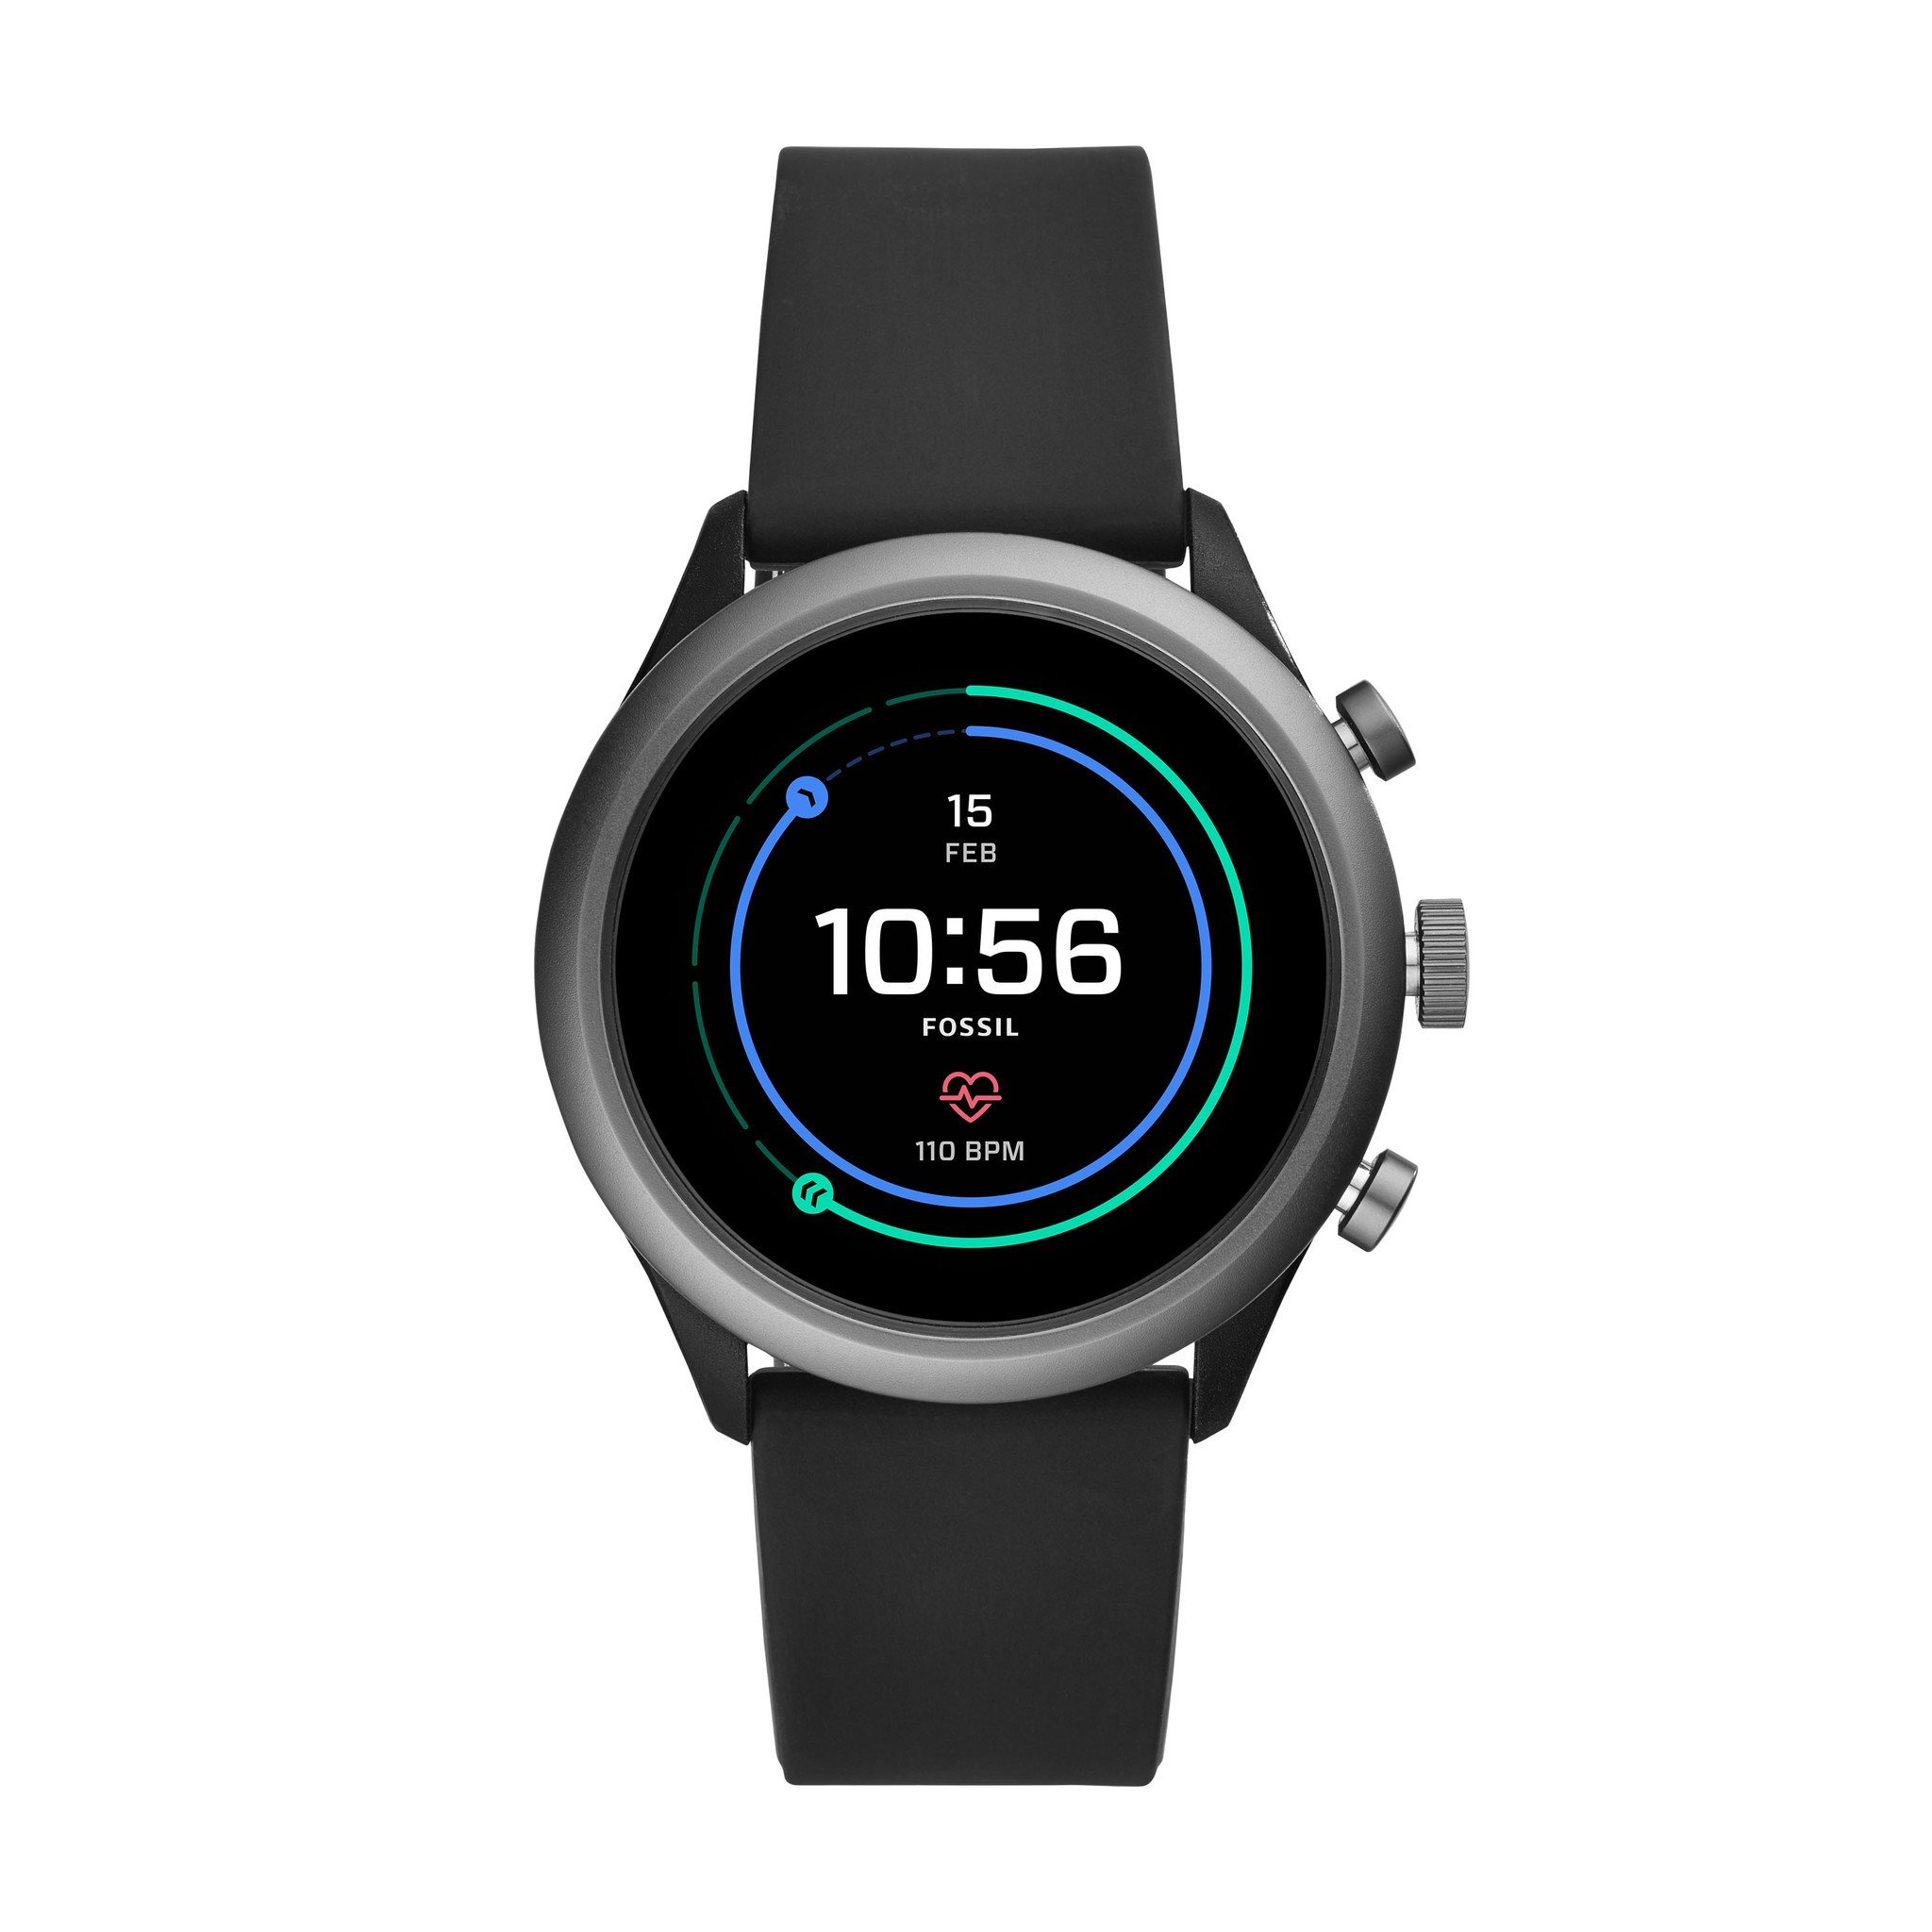 Fossil Sport watch announced with Wear 3100 and ultra lightweight body